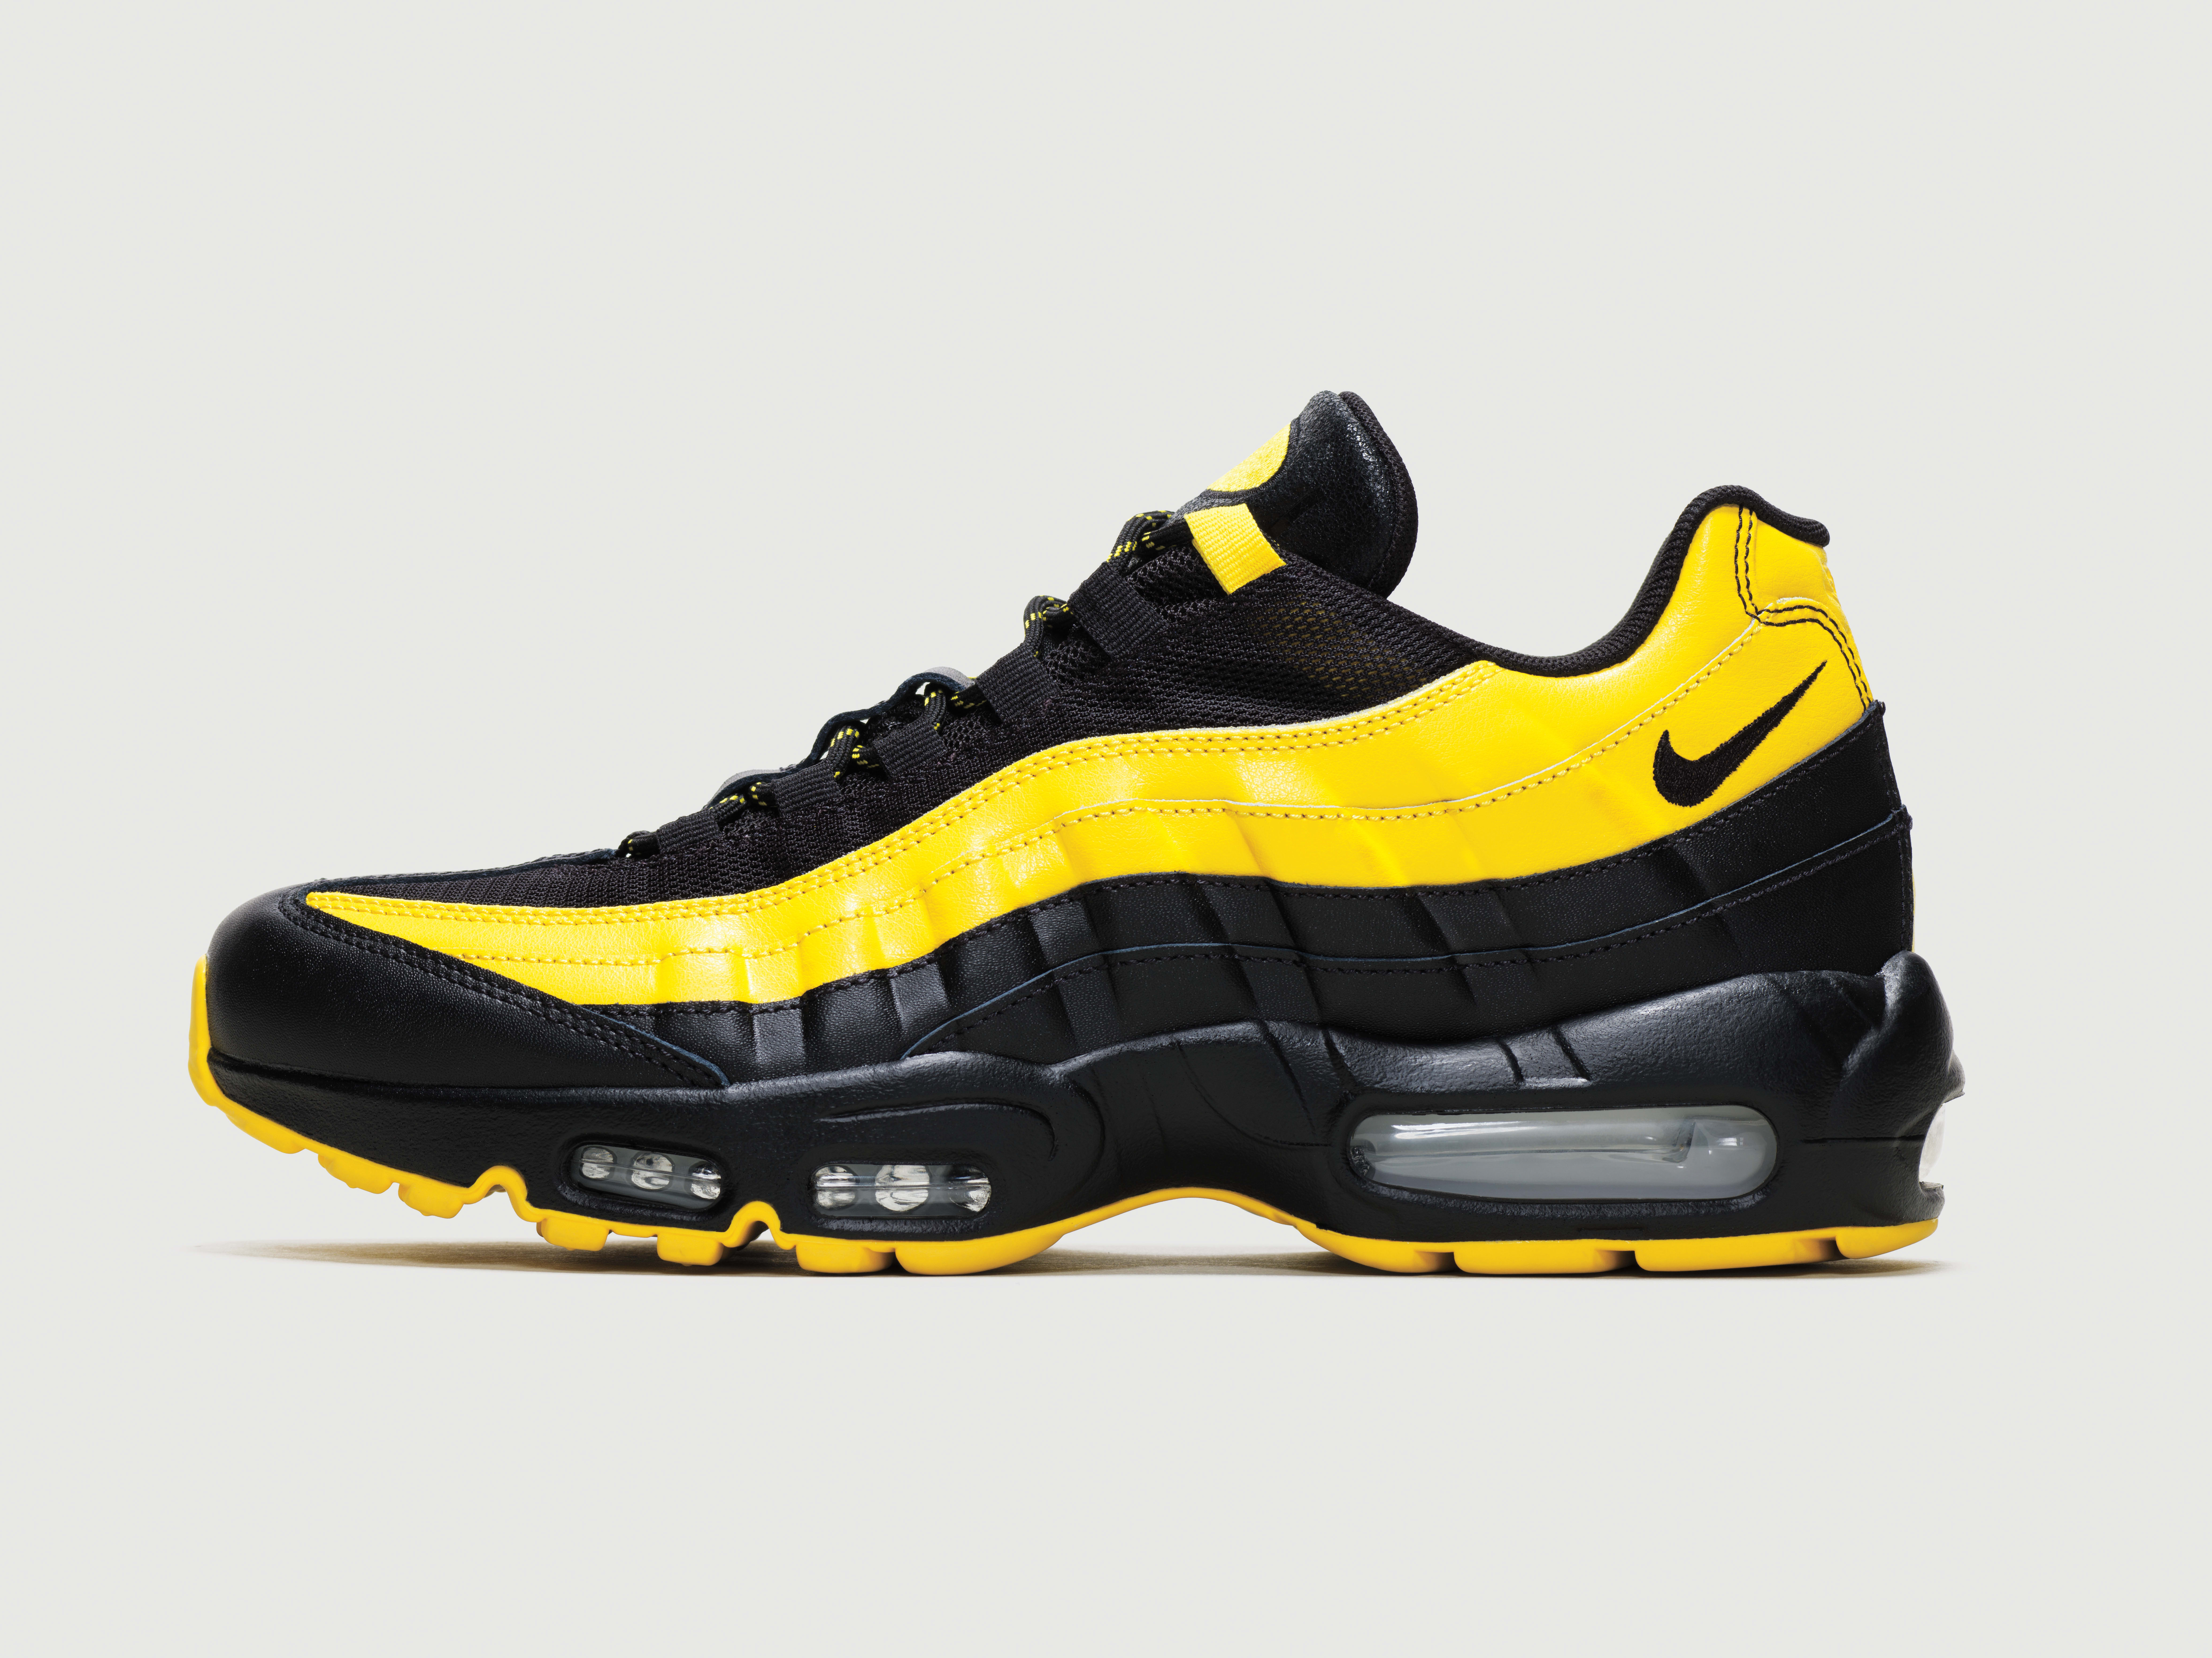 Frequency Air Max 95